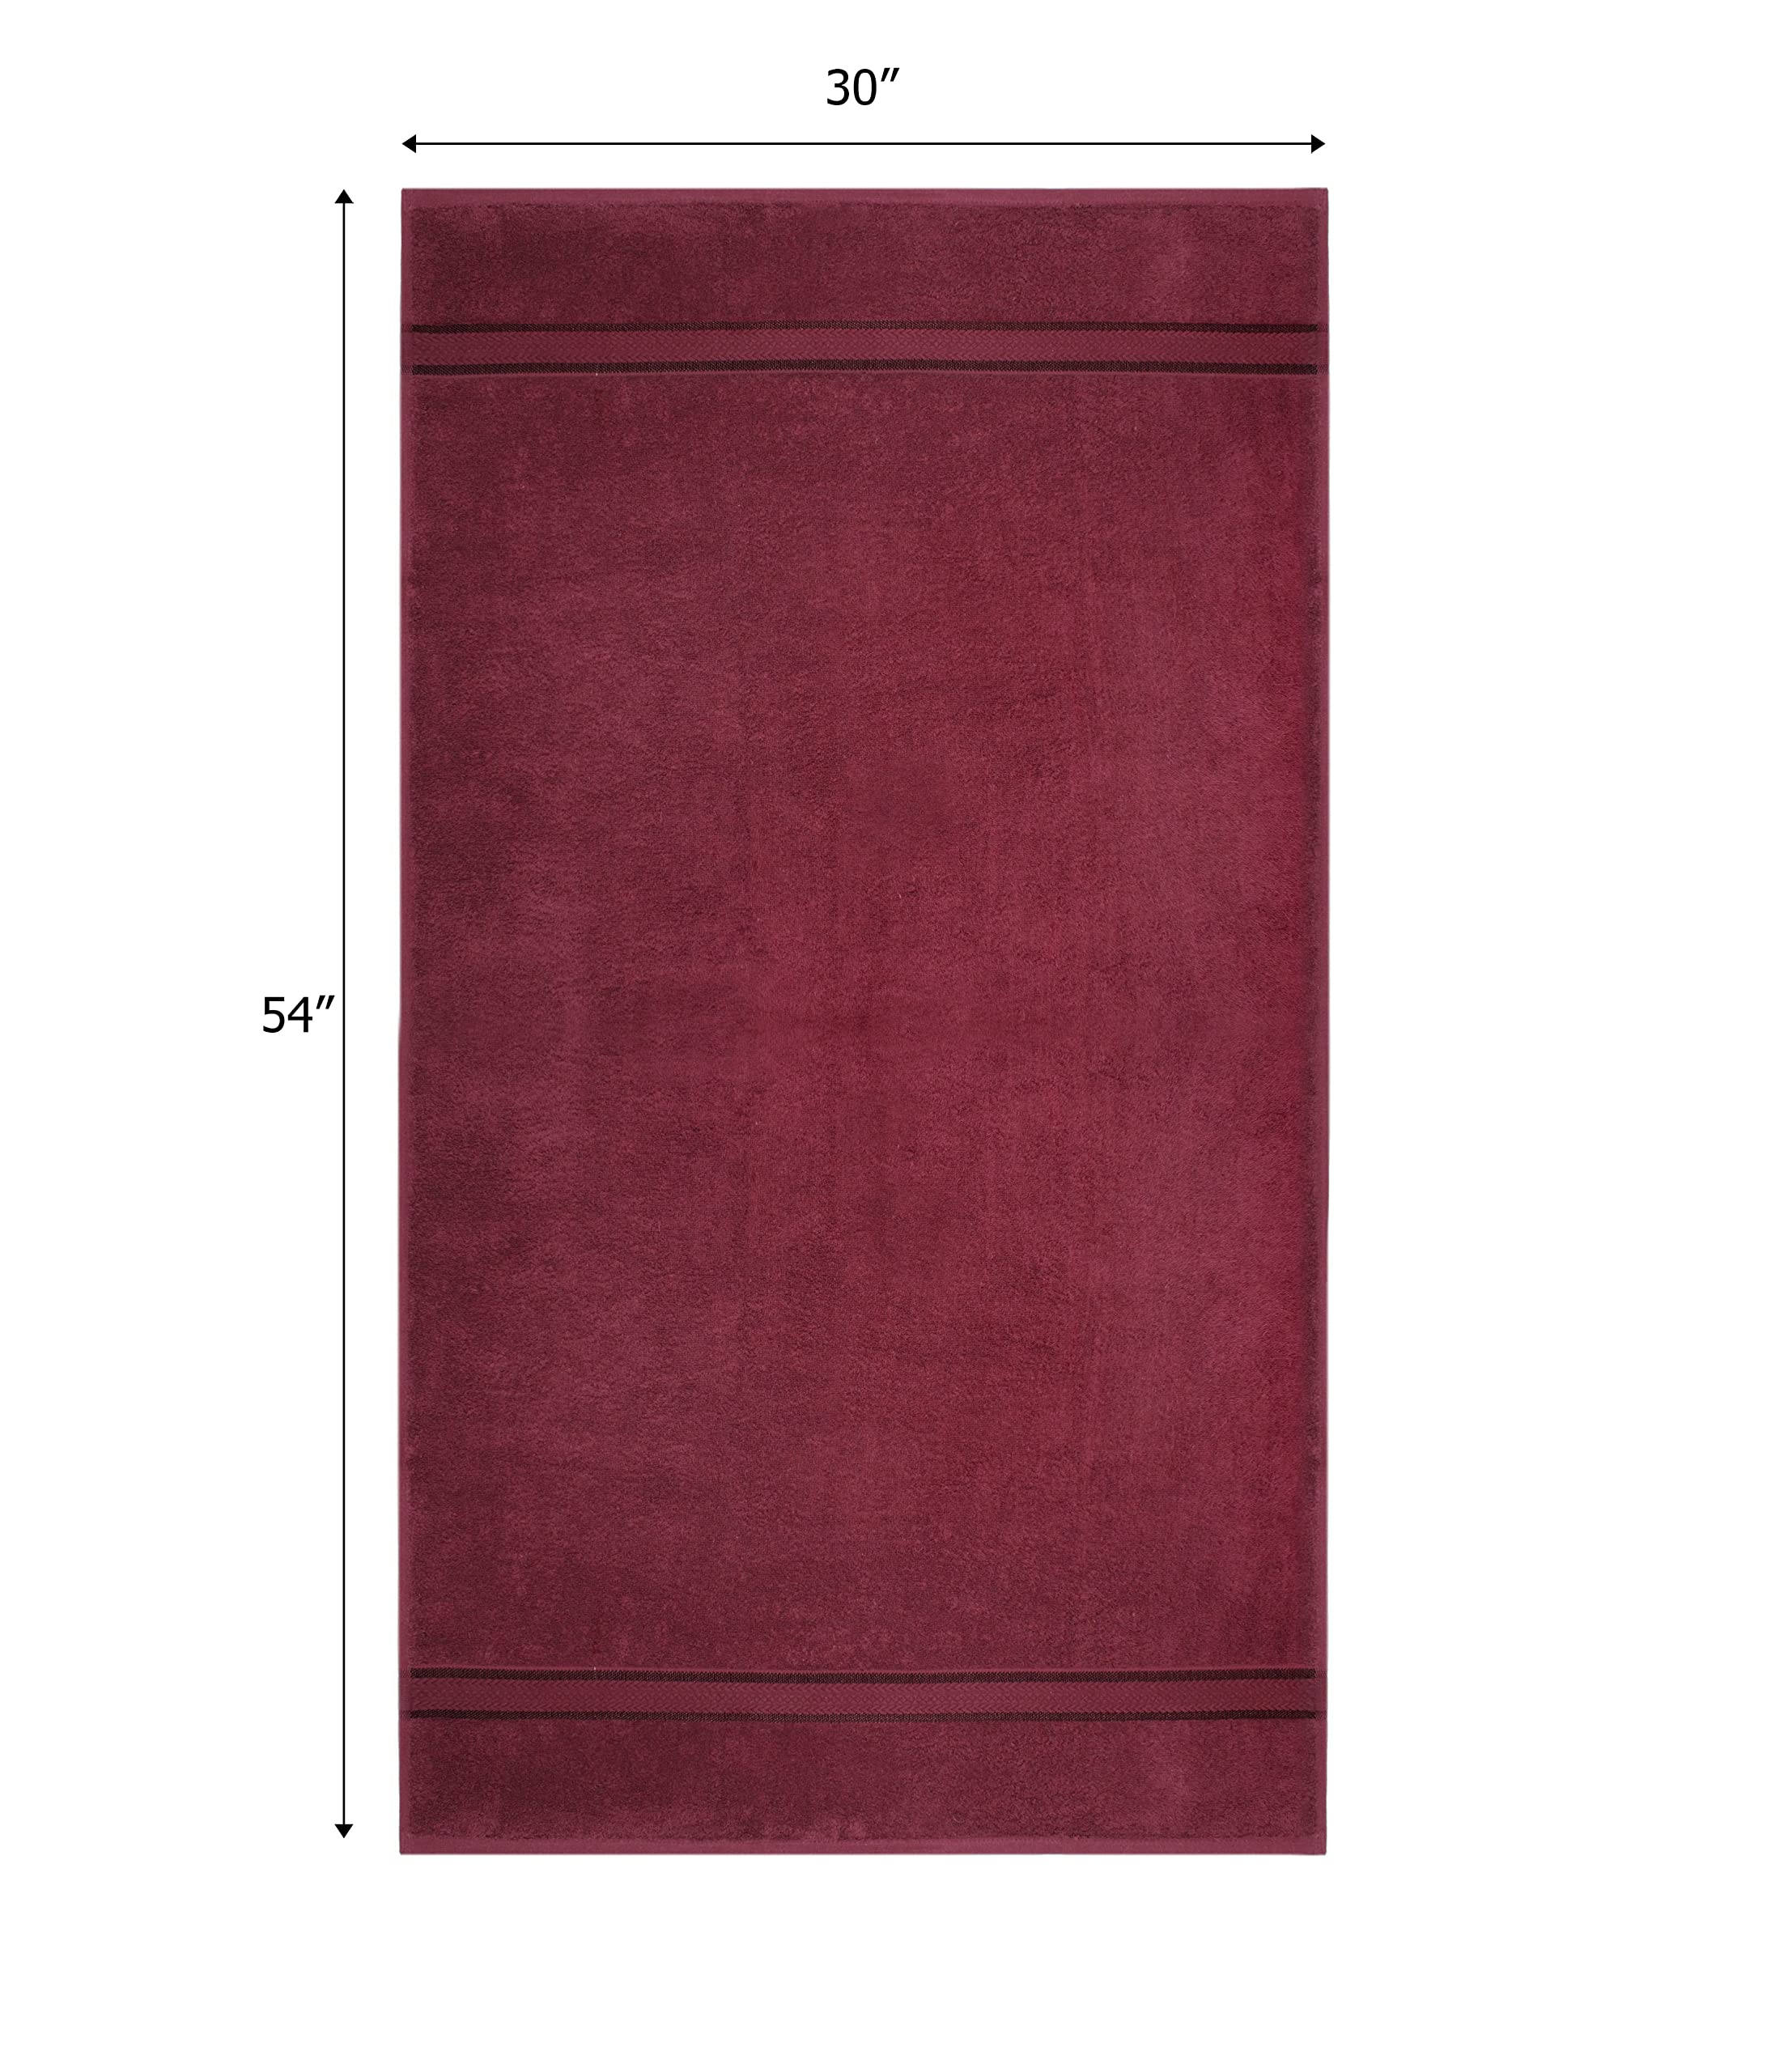 COTTON CRAFT Ultra Soft 4 Pack Oversized Extra Large Bath Towels 30x54 Burgundy Weighs 22 Ounces - 100% Pure Ringspun Cotton - Luxurious Rayon Trim - Ideal for Everyday use - Easy Care Machine wash